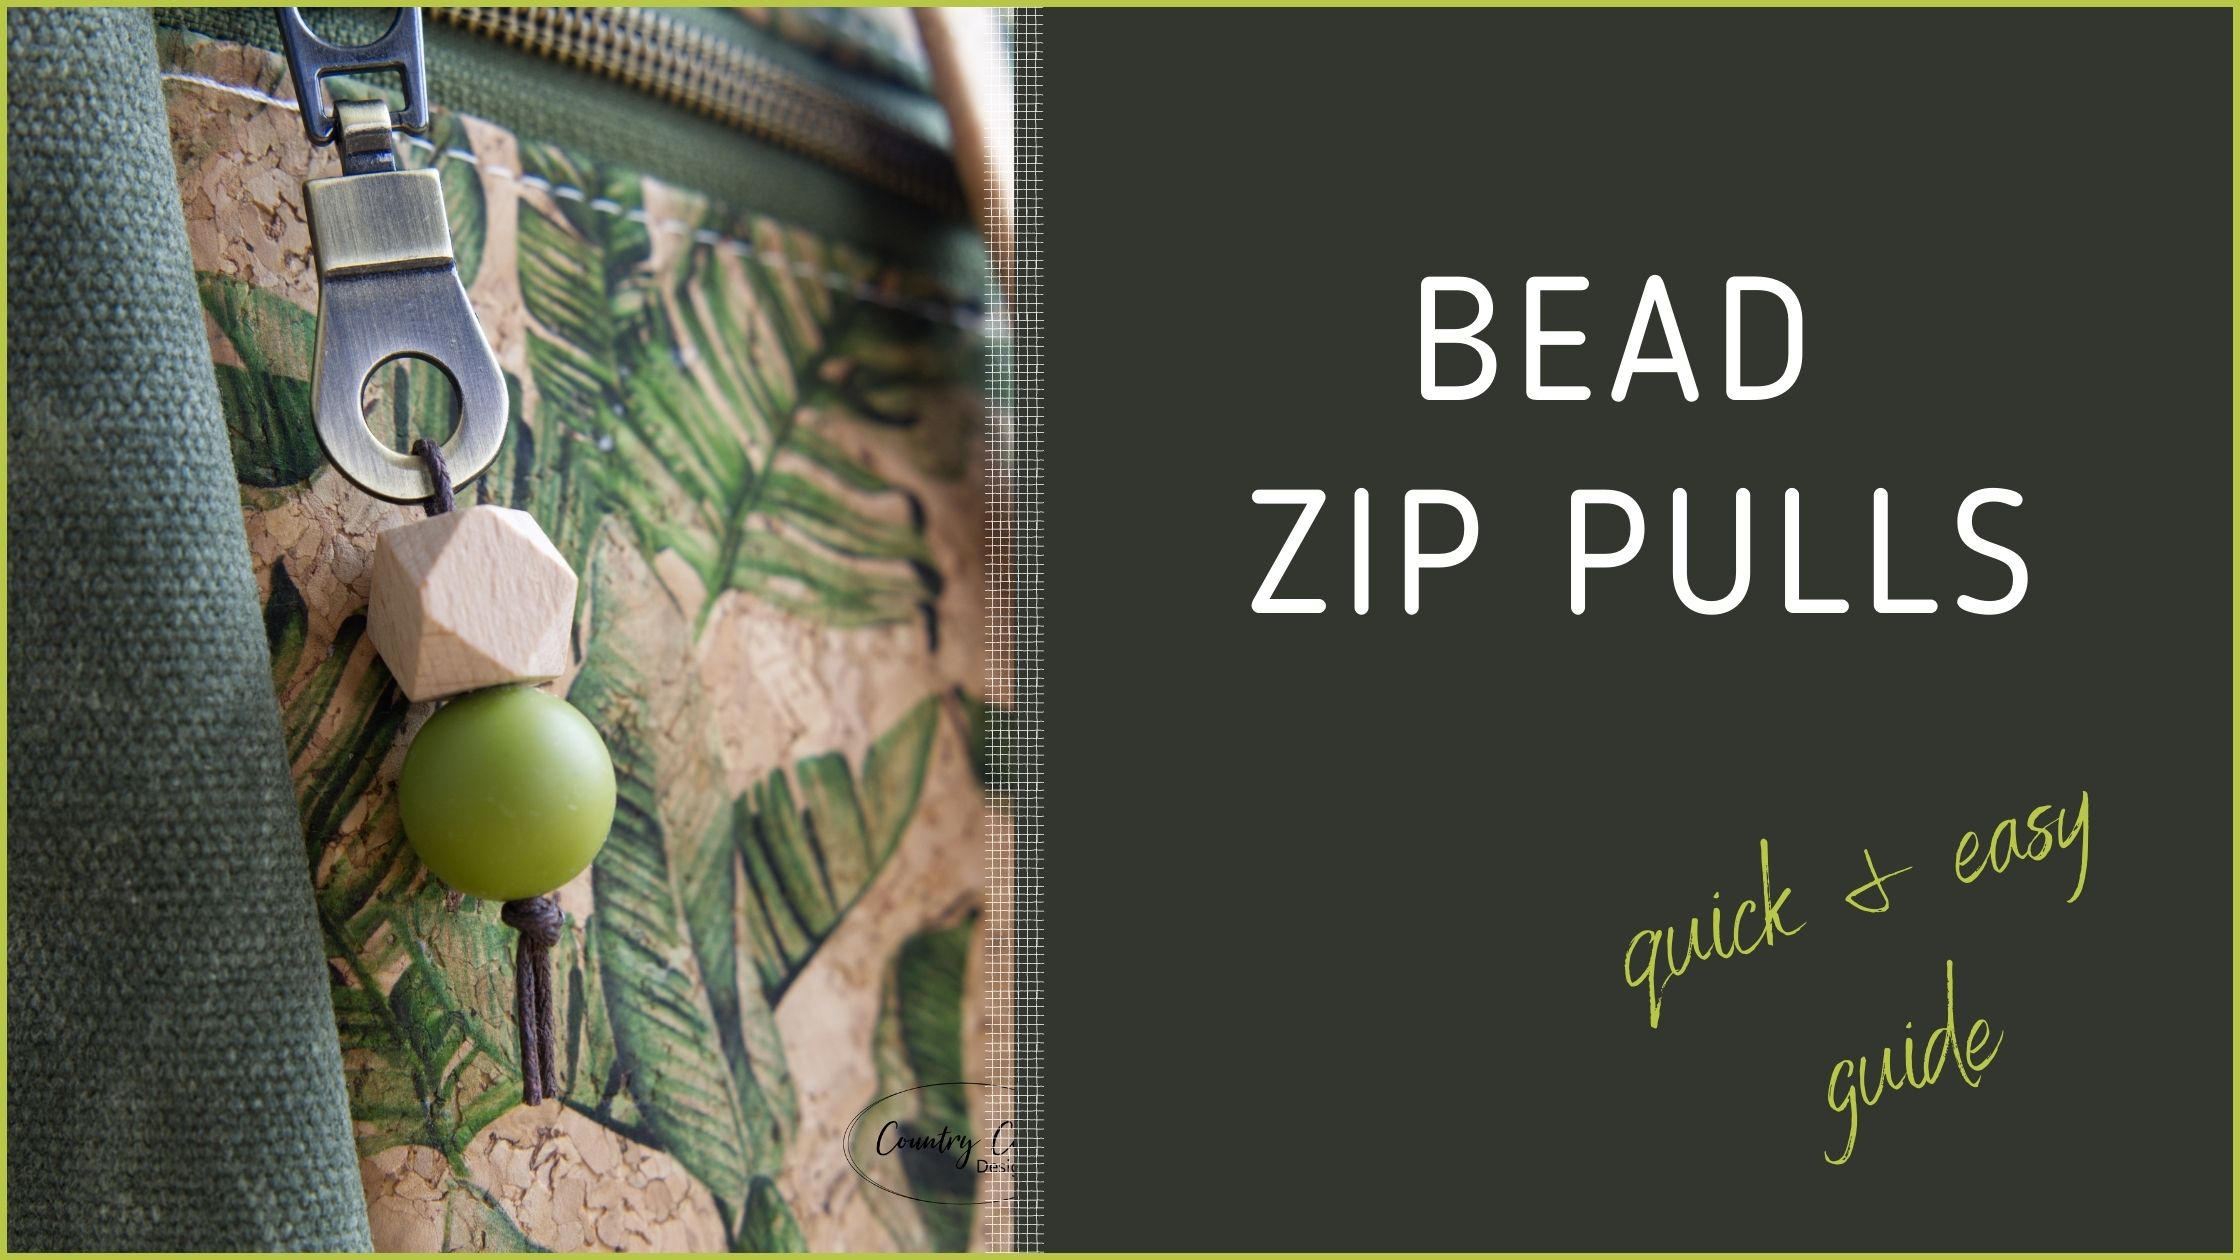 Add Beads to your Zip Pulls